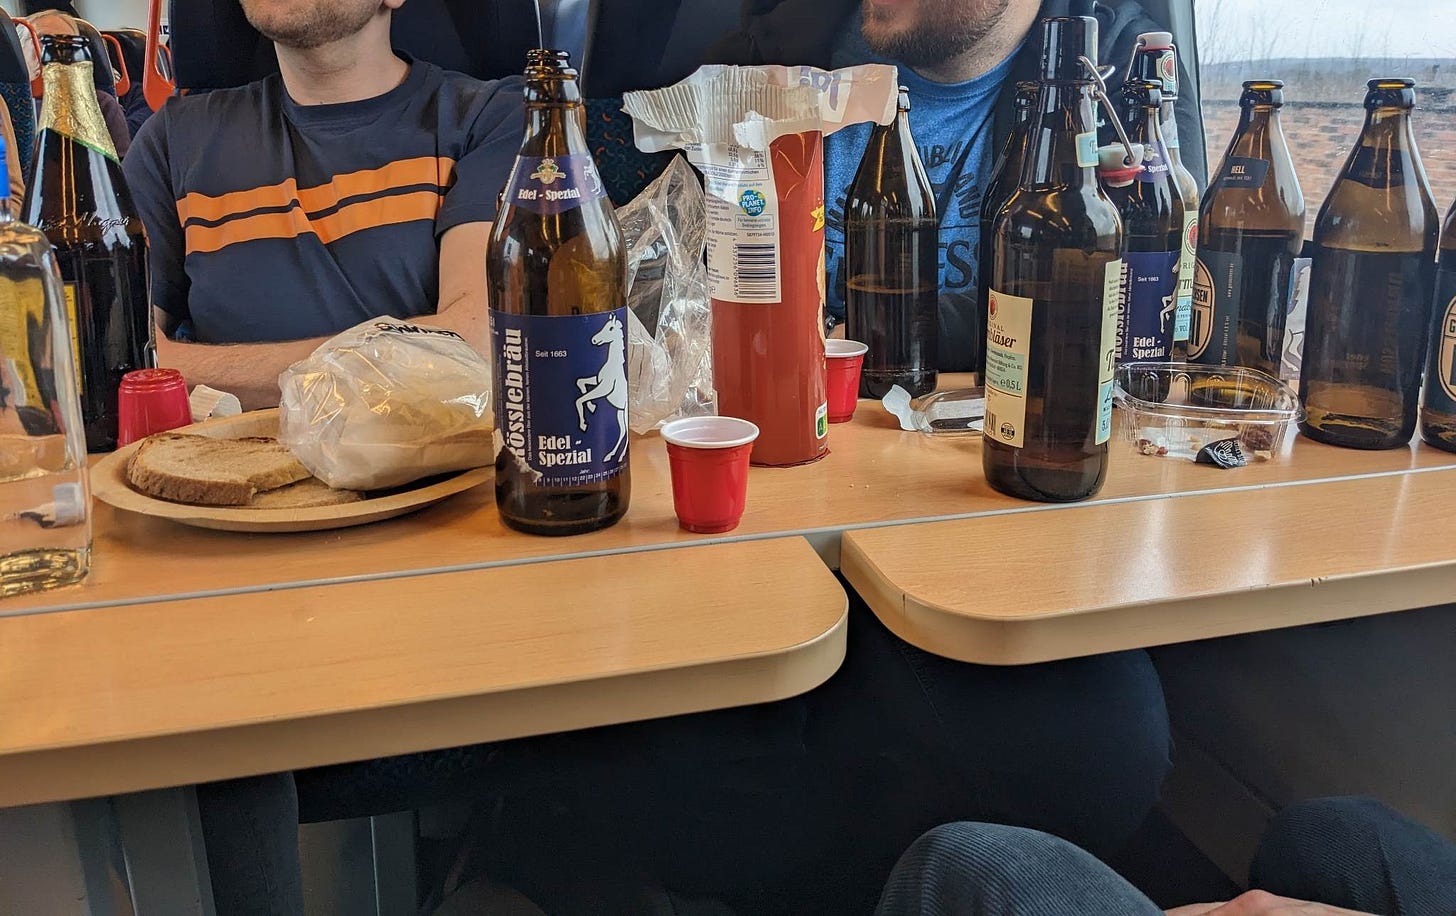 two men (faces cut off) at a train table covered in beer bottles and snacks